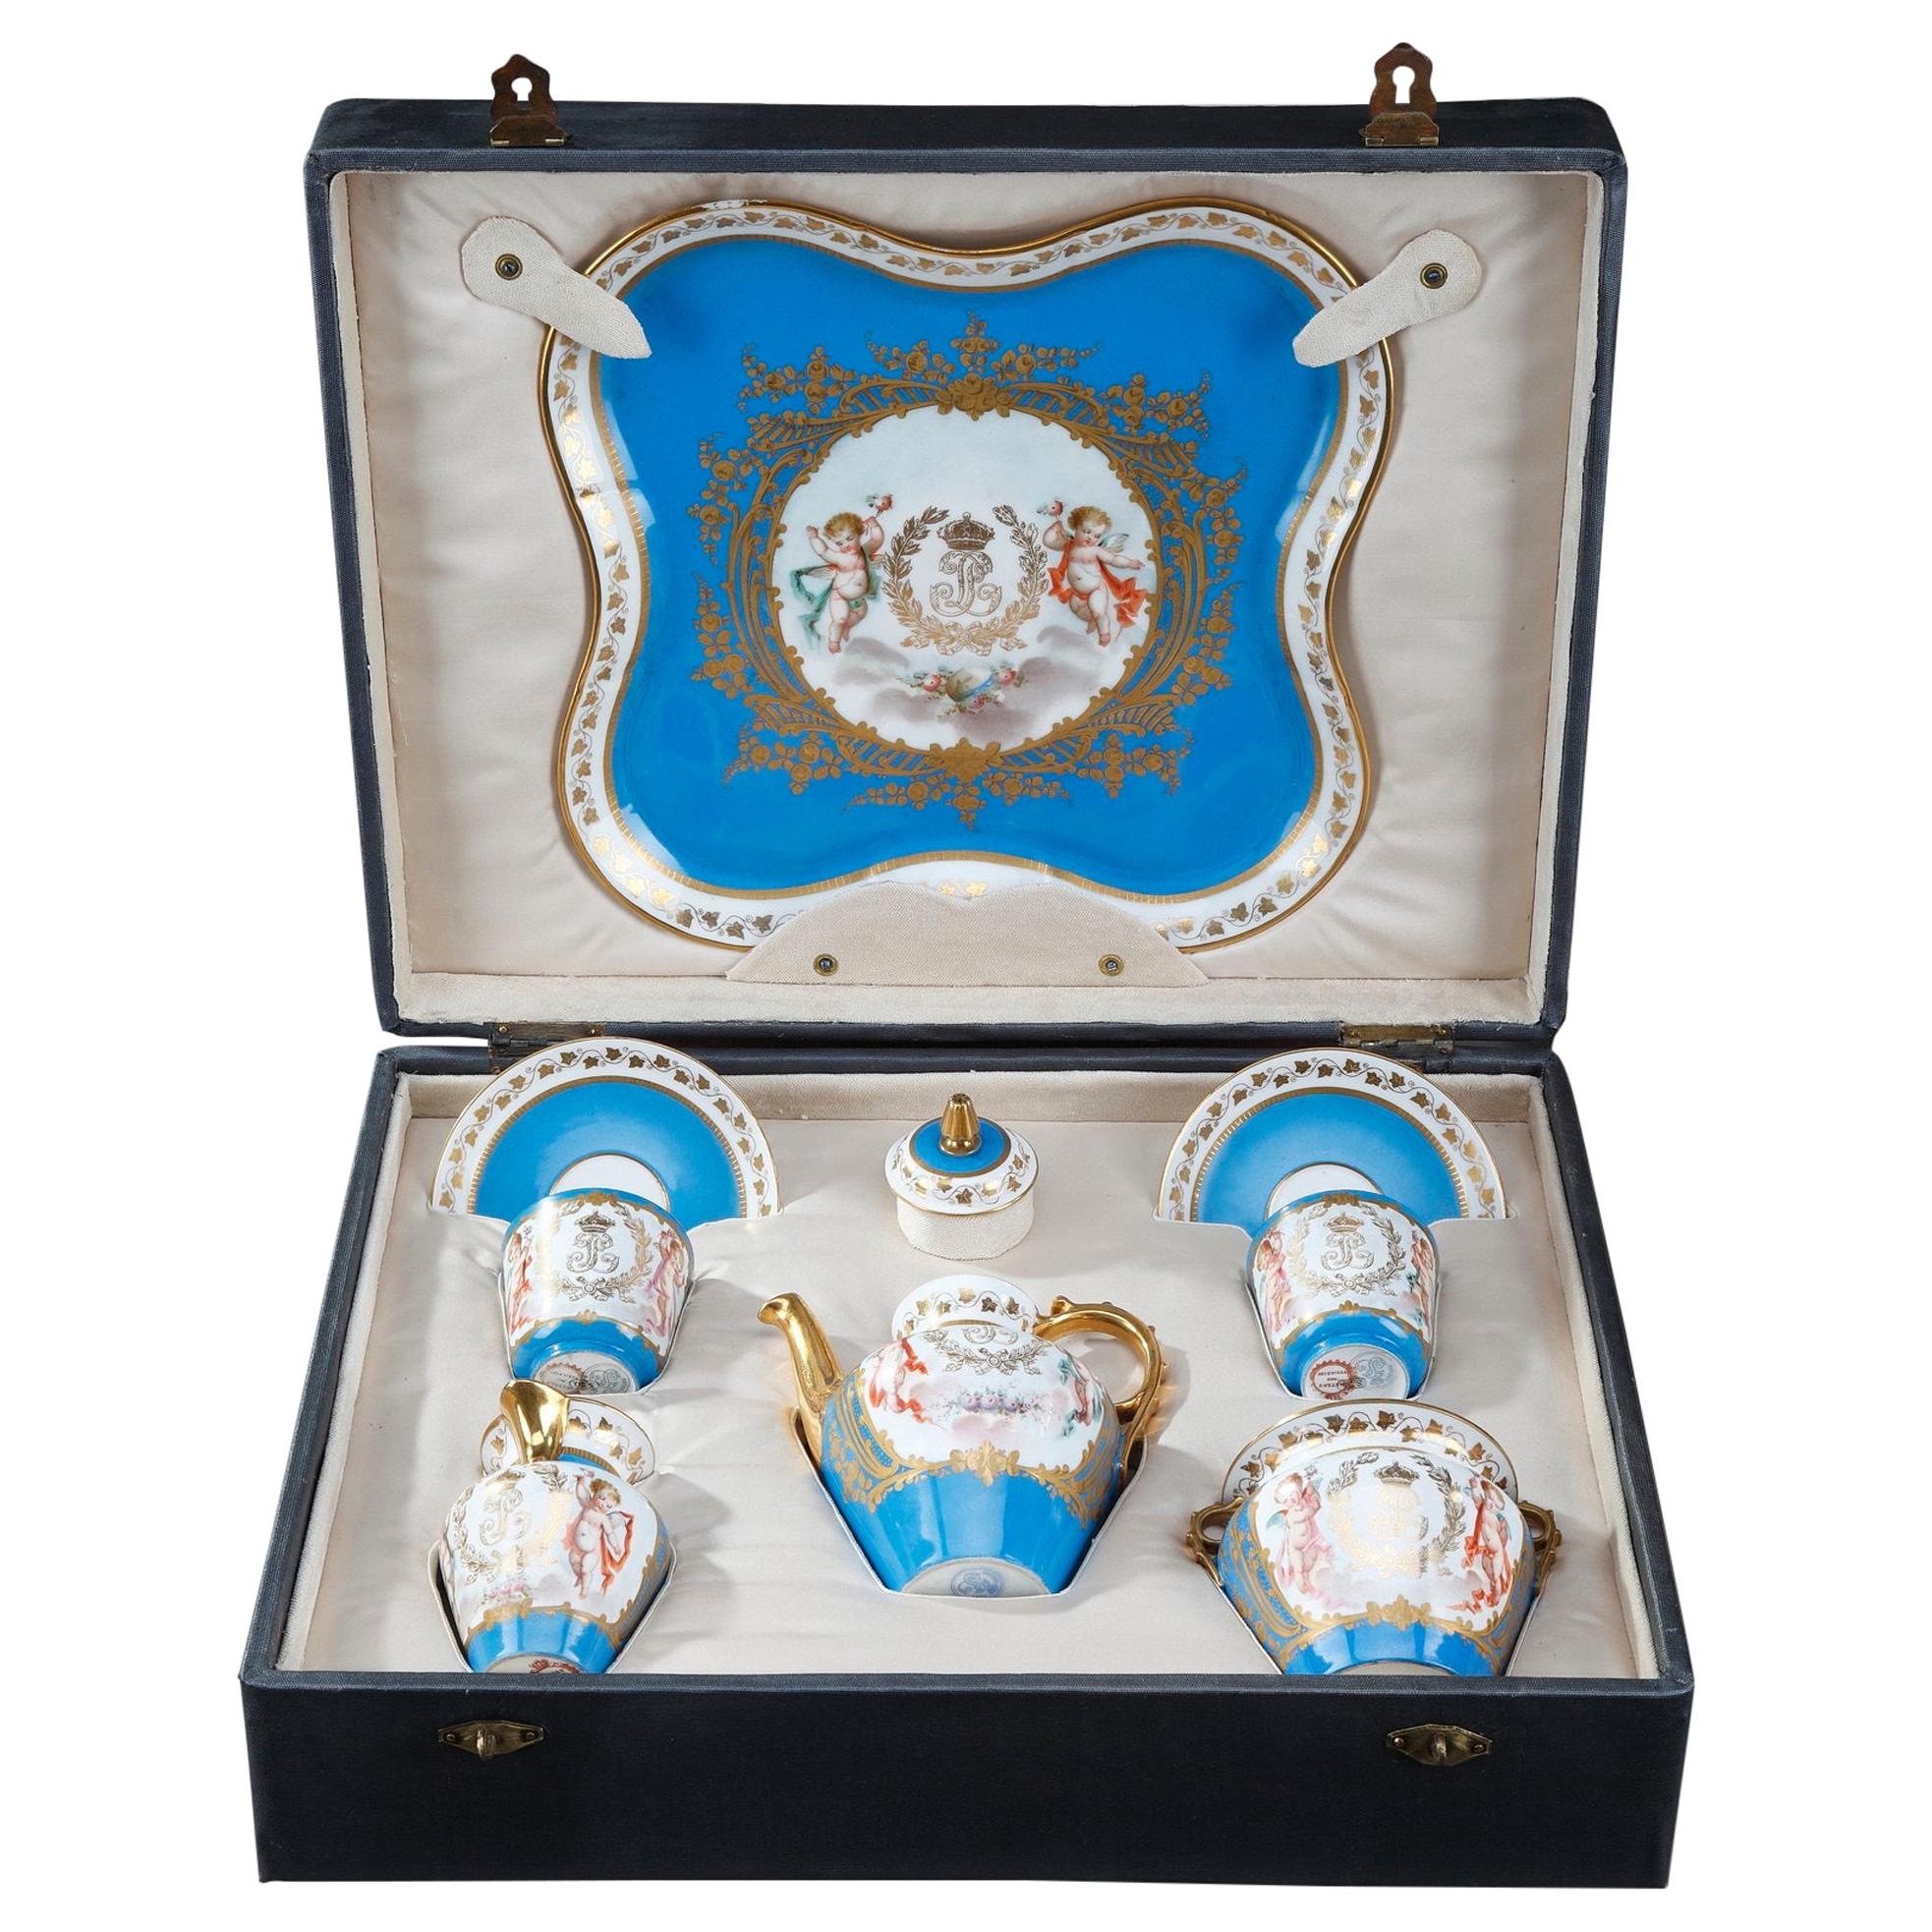 Tea Service with Sevres and Château des Tuileries Marks